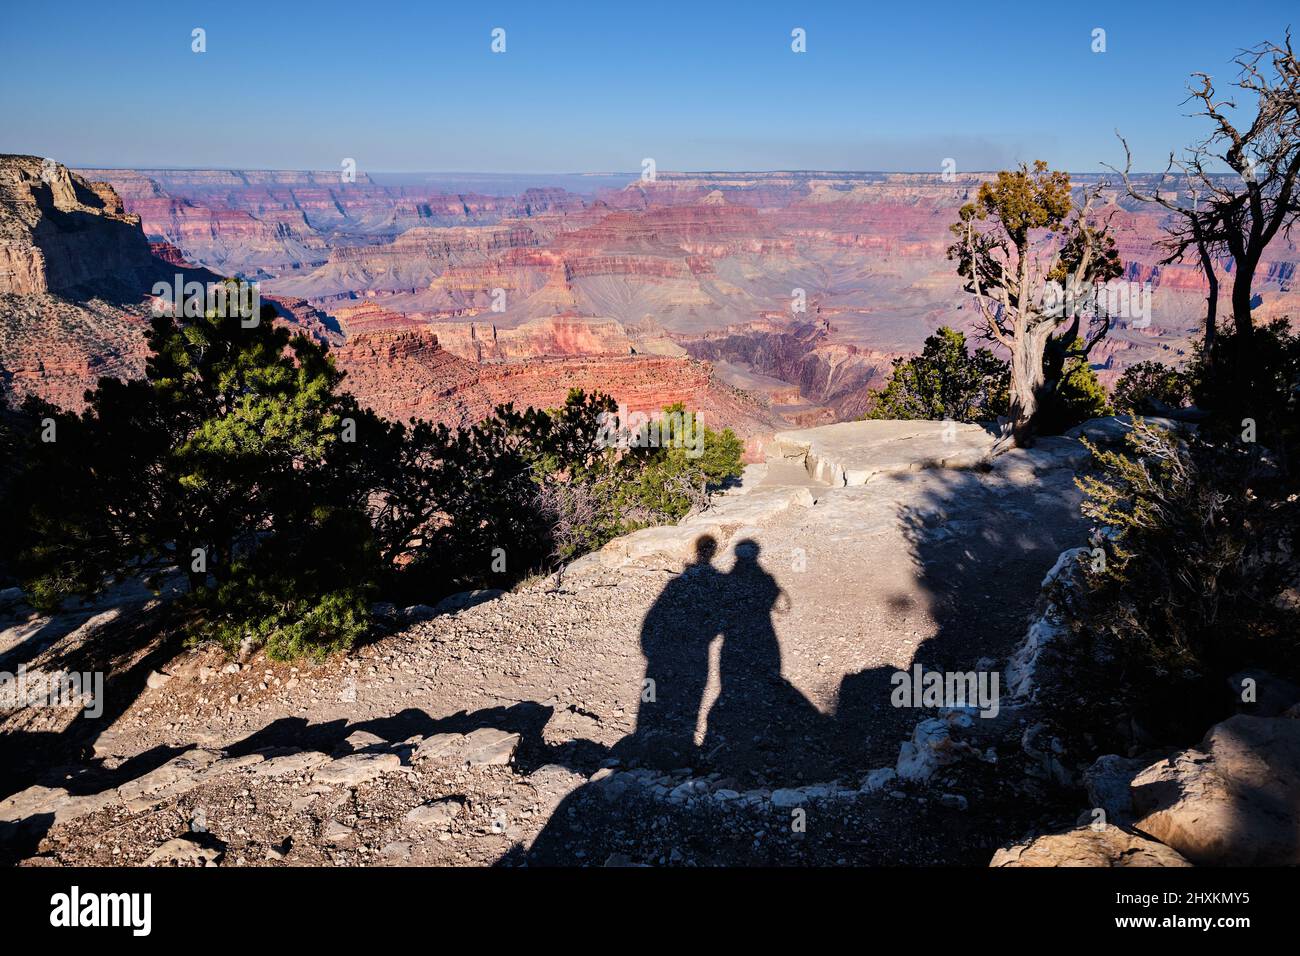 Shadows of two people touching at the shoulder on outcrop near Yavapai Point with a wide view of Grand Canyon spreading out in the background Stock Photo